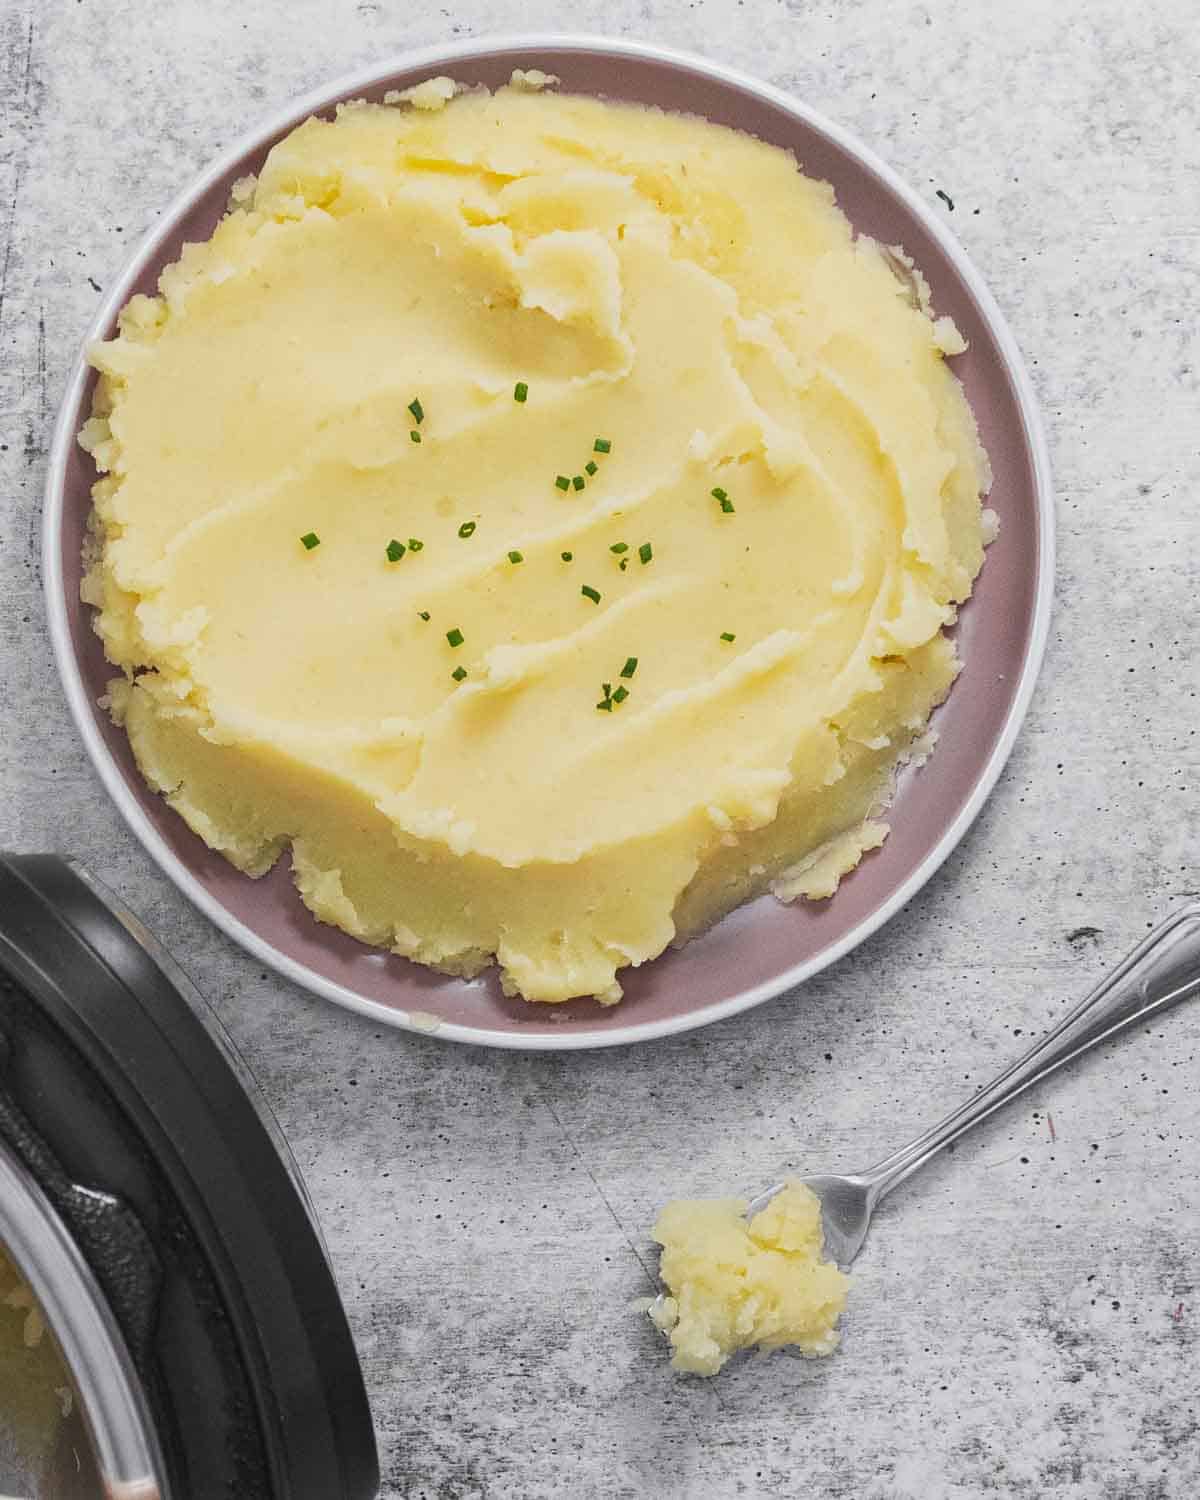 Garlic mashed potatoes served on a plate garnished with green onions.